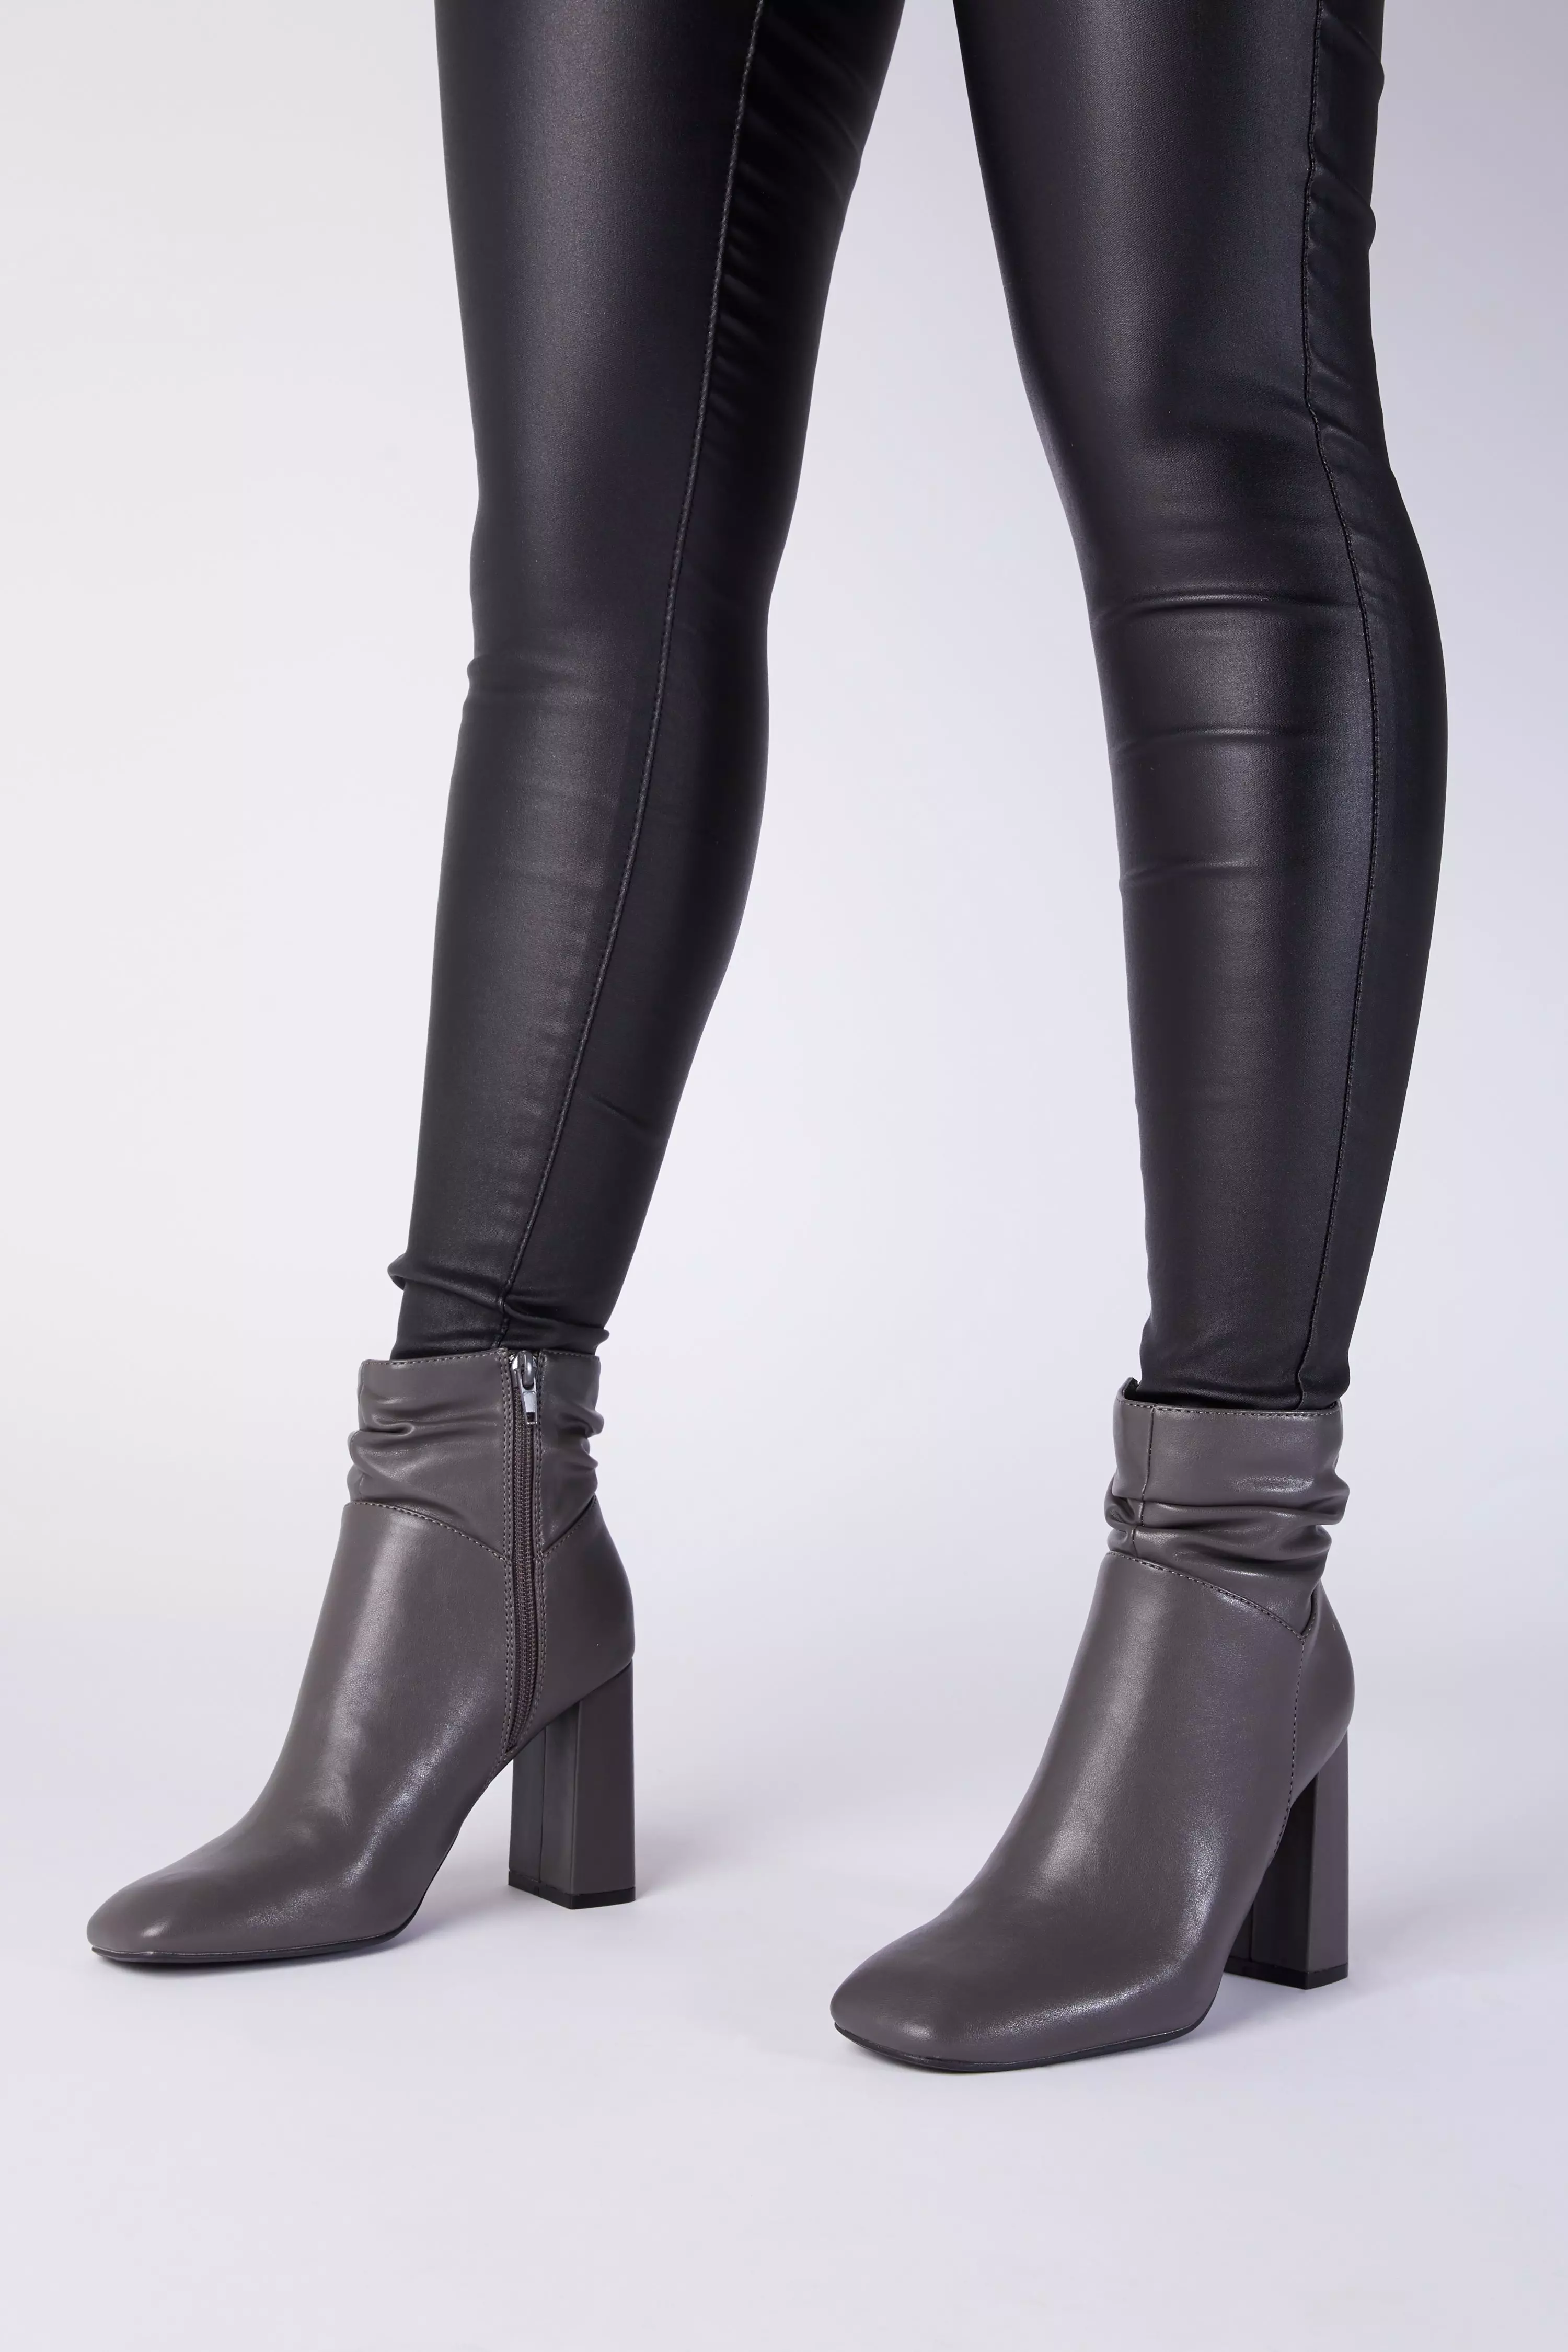 Black Ruched Ankle Boots